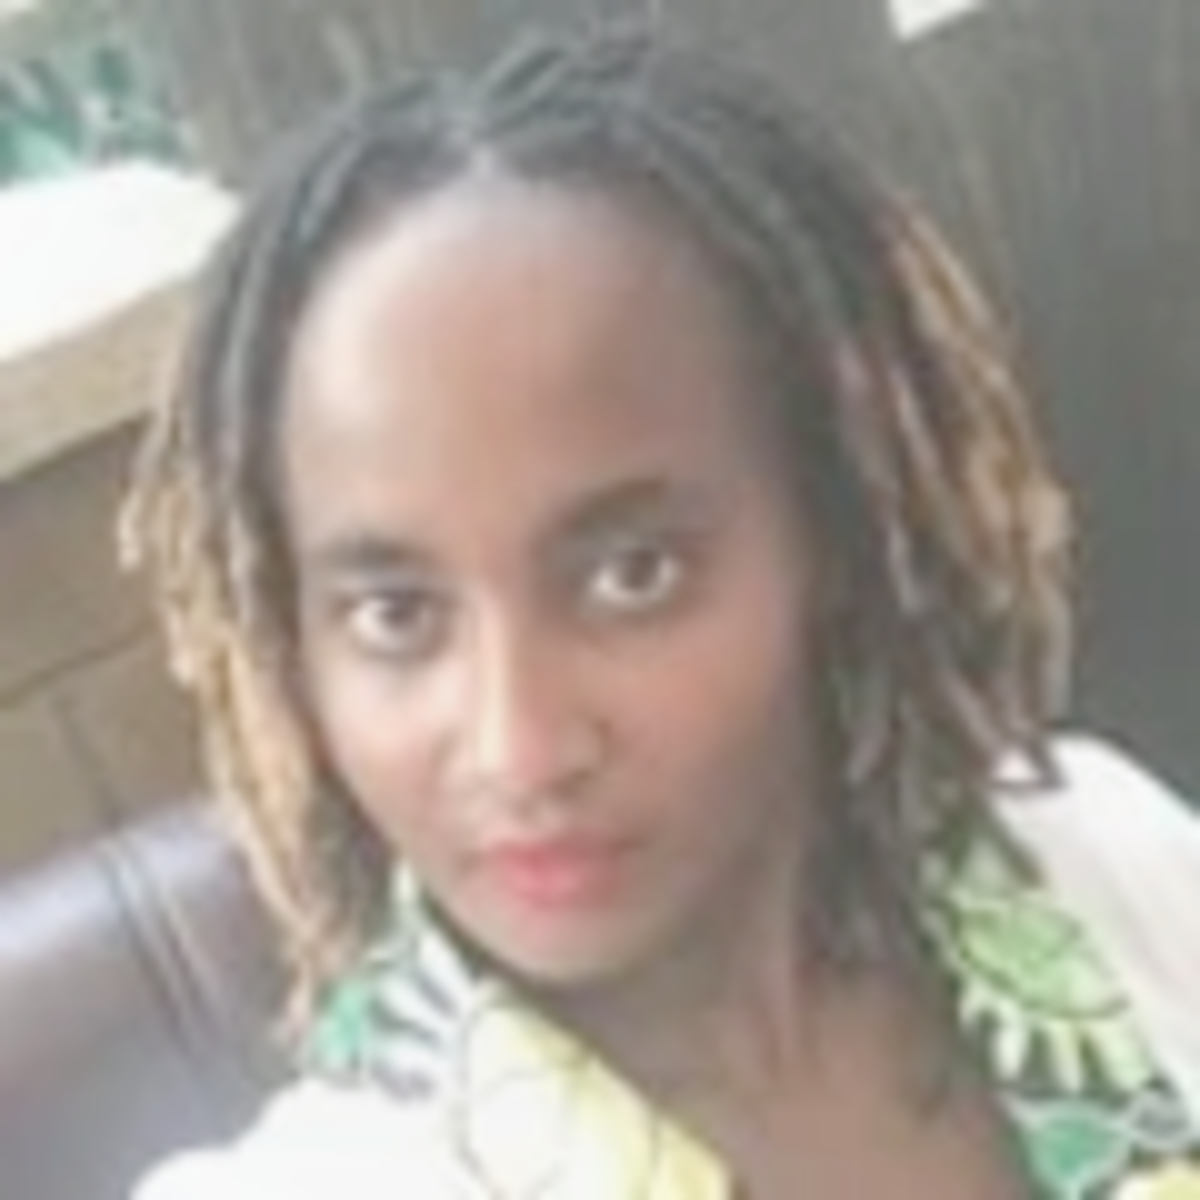 Ruth Kamau holds a Bachelor of Engineering (B.Eng.) from Kenyatta University and is a writer for America News.